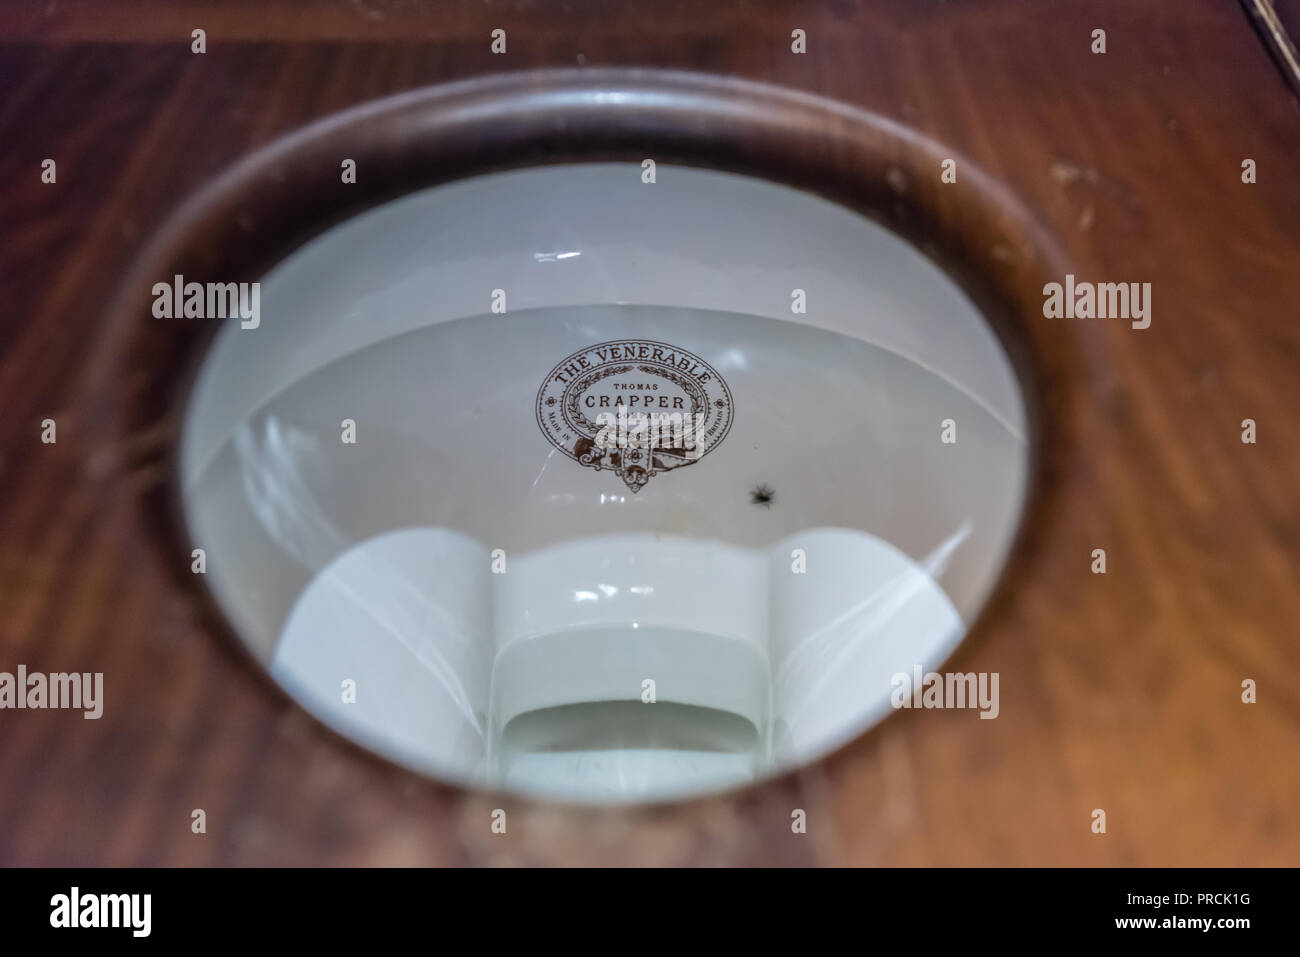 Logo on an old fashioned bathroom sink and taps made by Thomas Crapper and Company Stock Photo